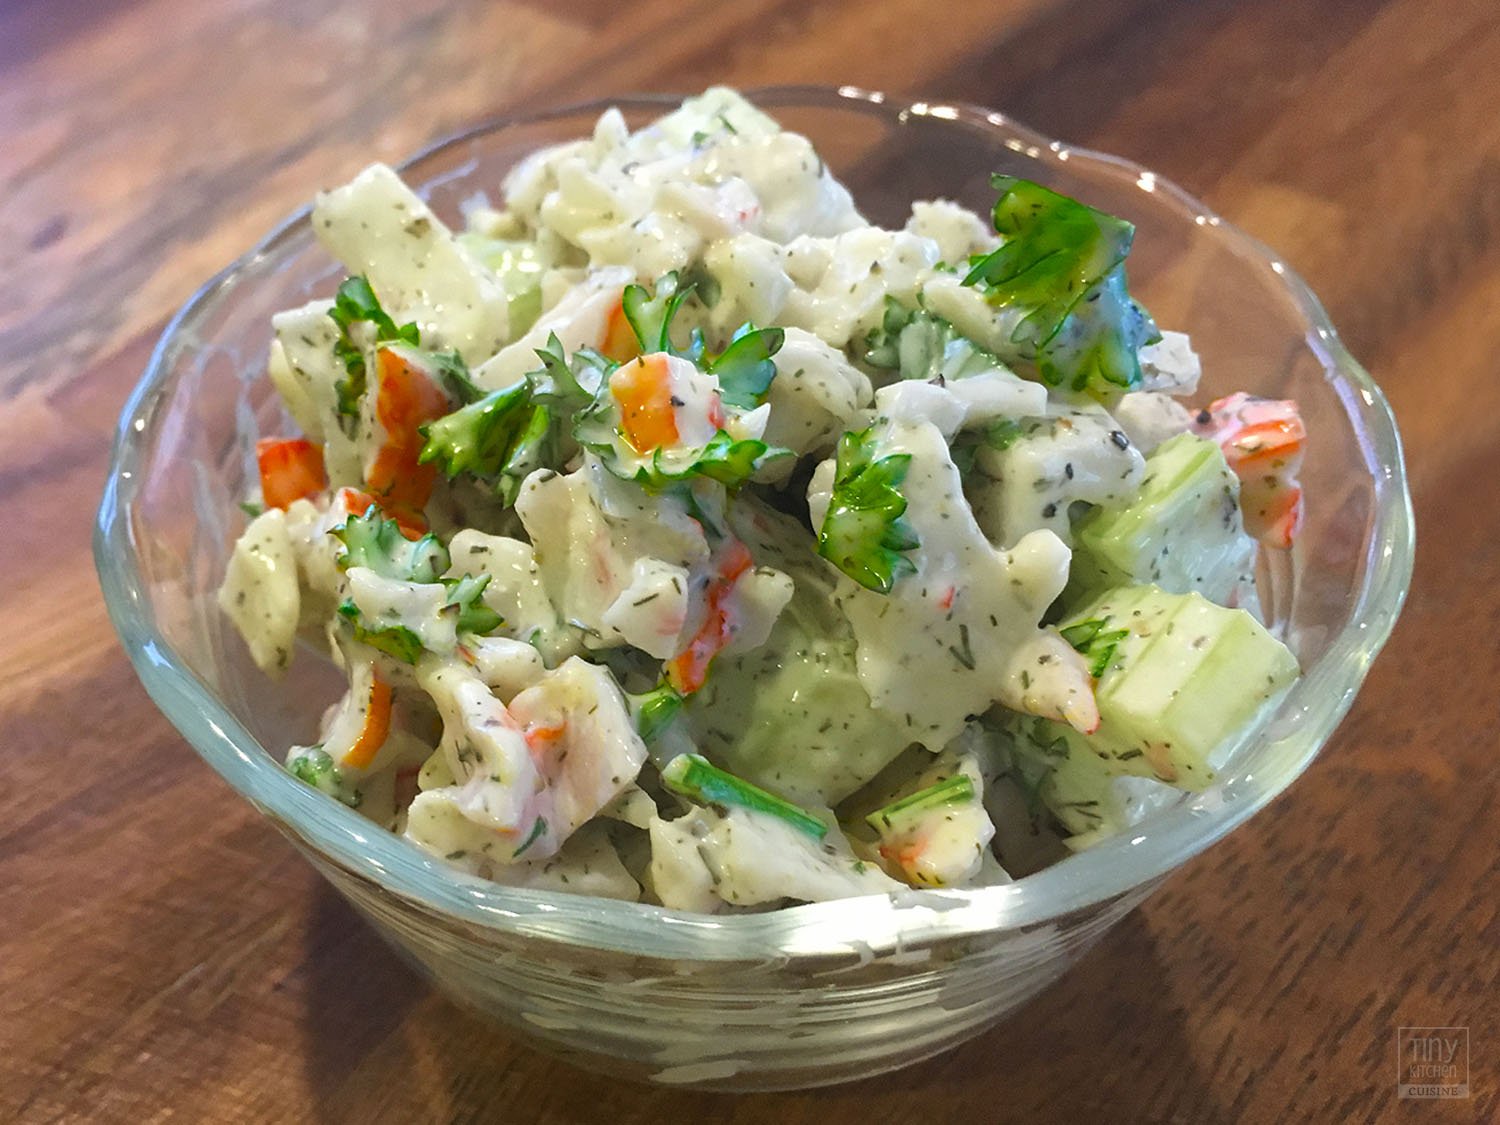 This easy Imitation Crab Salad recipe is a tasty seafood salad that is low in calories and packs a nice crunch. | Tiny Kitchen Cuisine | http://tiny.kitchen